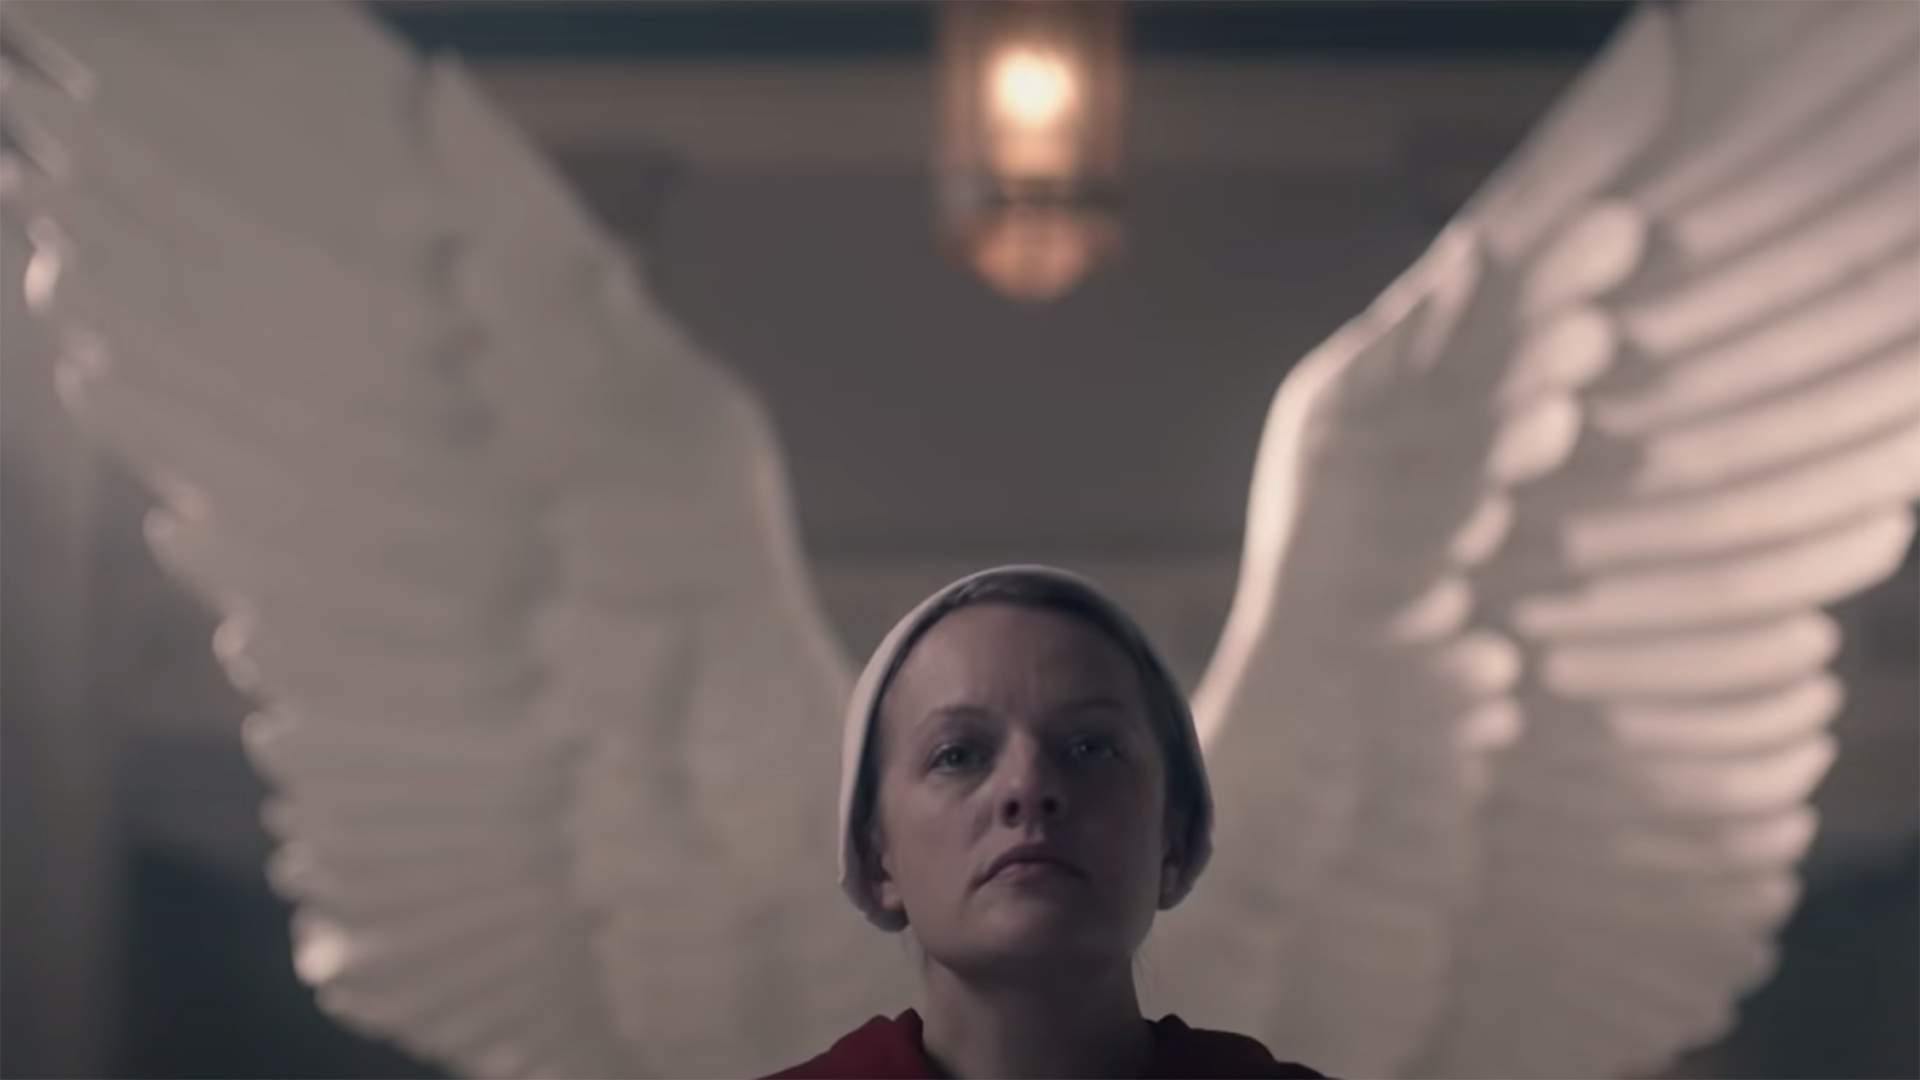 The First Trailer for 'The Handmaid's Tale' Season Four Teases Rebellion, Revolution and an Uprising